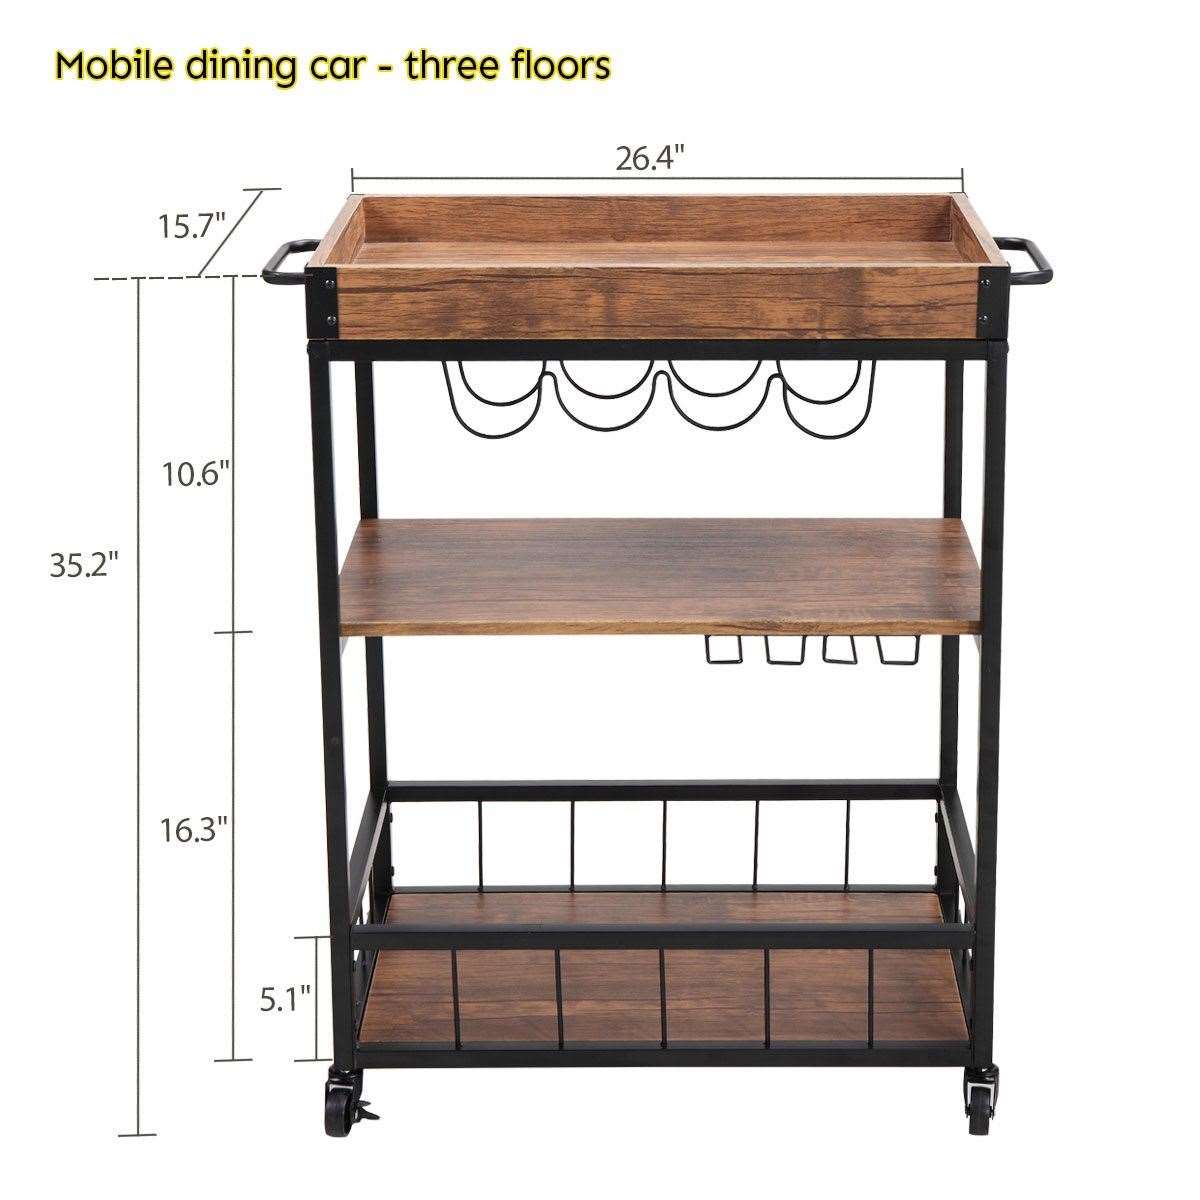 3-Tier Industrial Bar Serving Cart, Mobile Kitchen Storage Cart with Casters and Removable Tray, Wood Metal Serving Trolley for Home Dining Room, Brown and Black XH